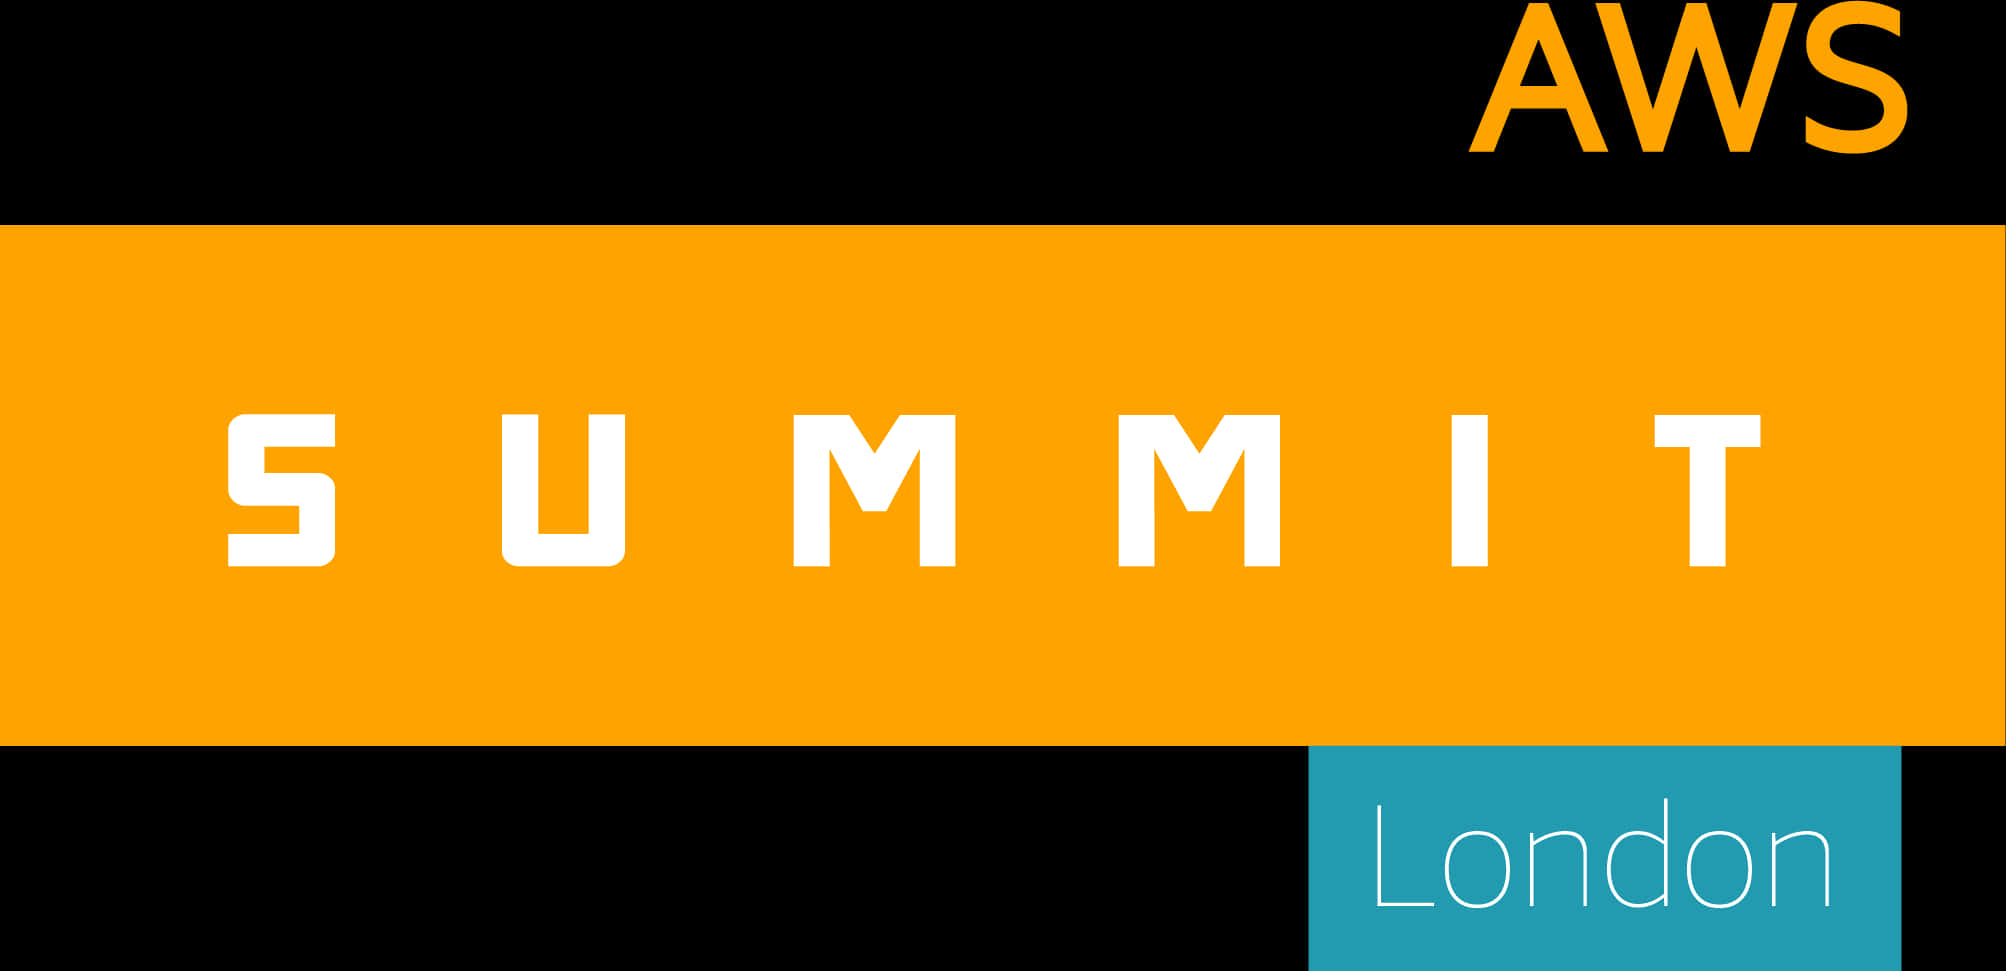 A W S Summit London Banner PNG image